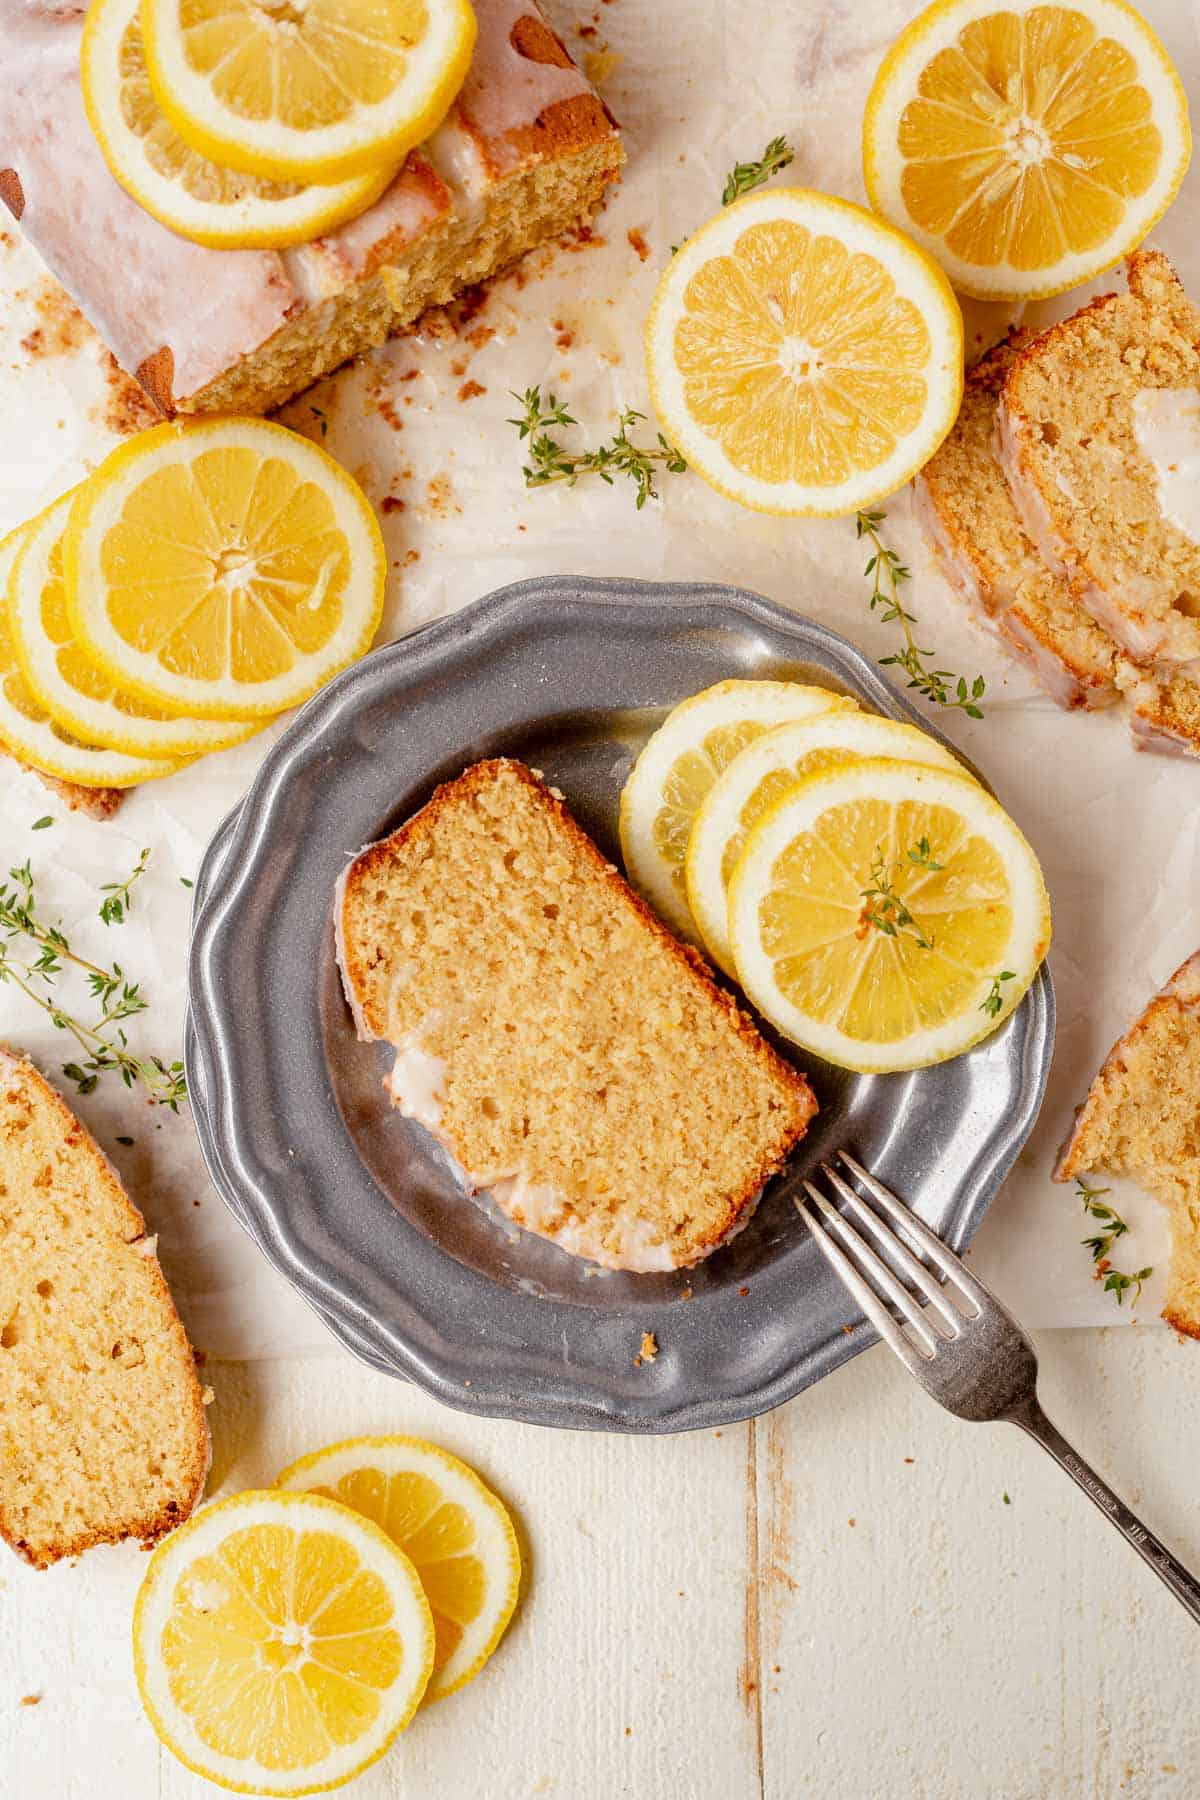 a piece of gluten-free lemon drizzle cake on a plate with lemon slices